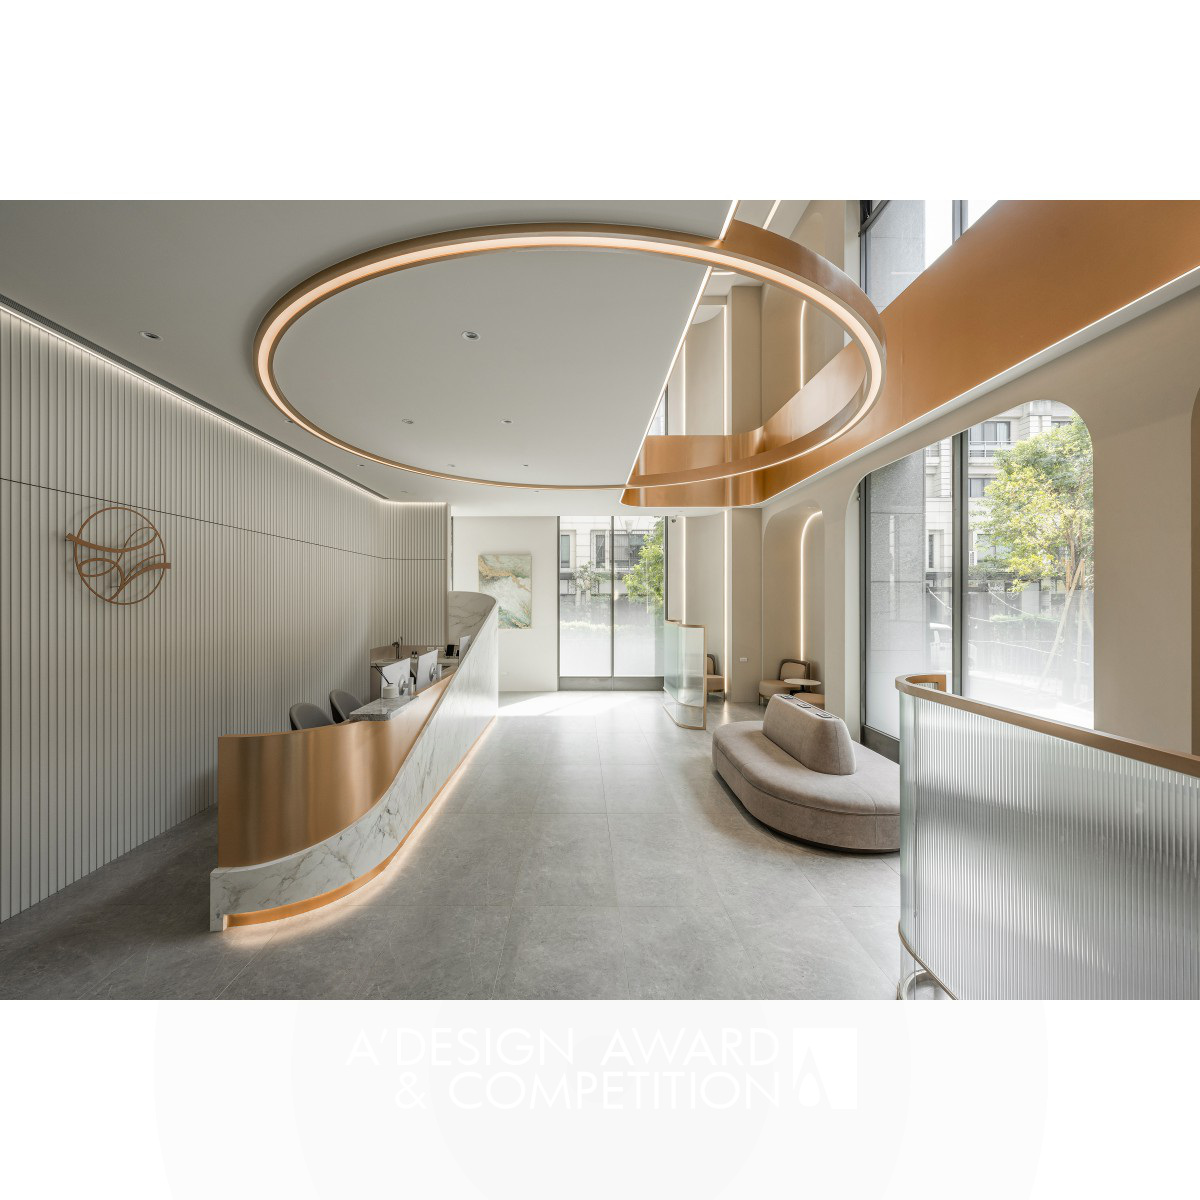 Chen.chiawen Aesthetic Medical Clinic